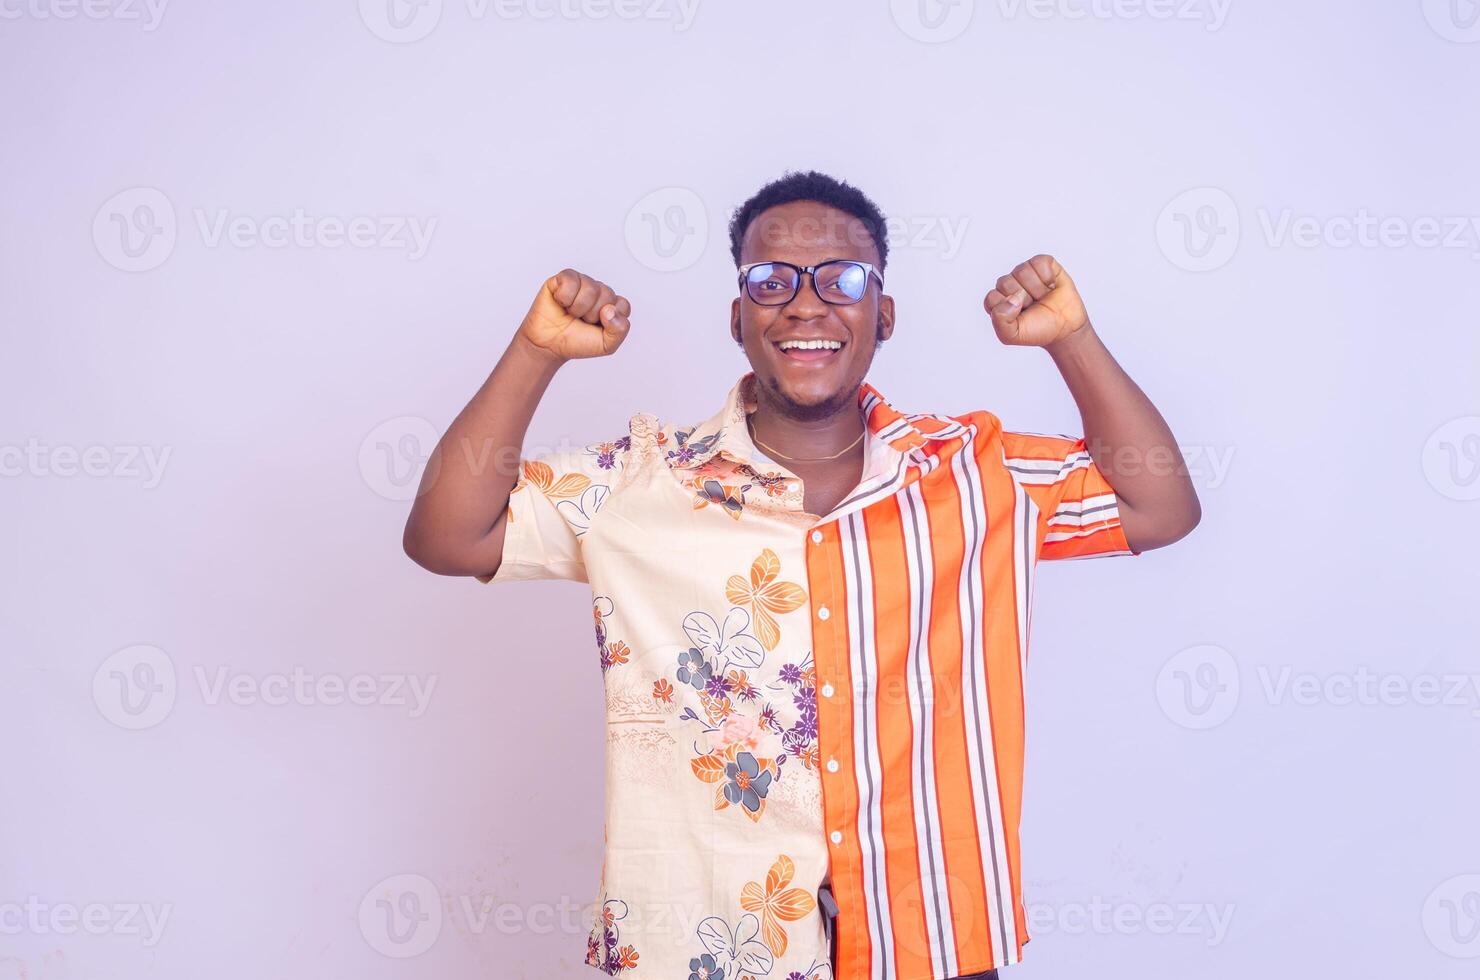 It's incredible Portrait of a happy and excited man looking up with mouth open and both arms up photo